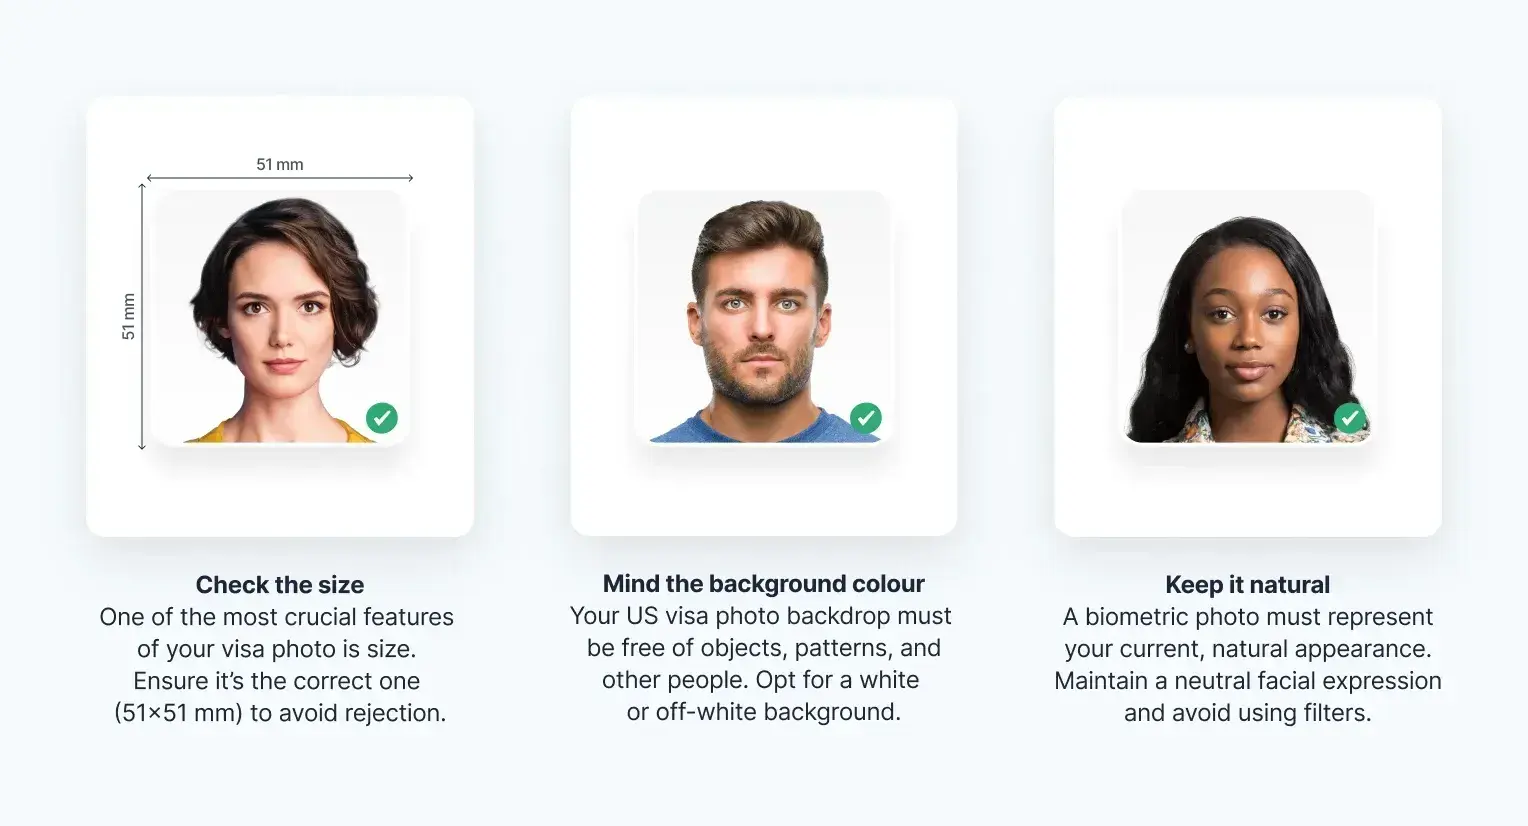 How to prepare yourself for a US visa photo.